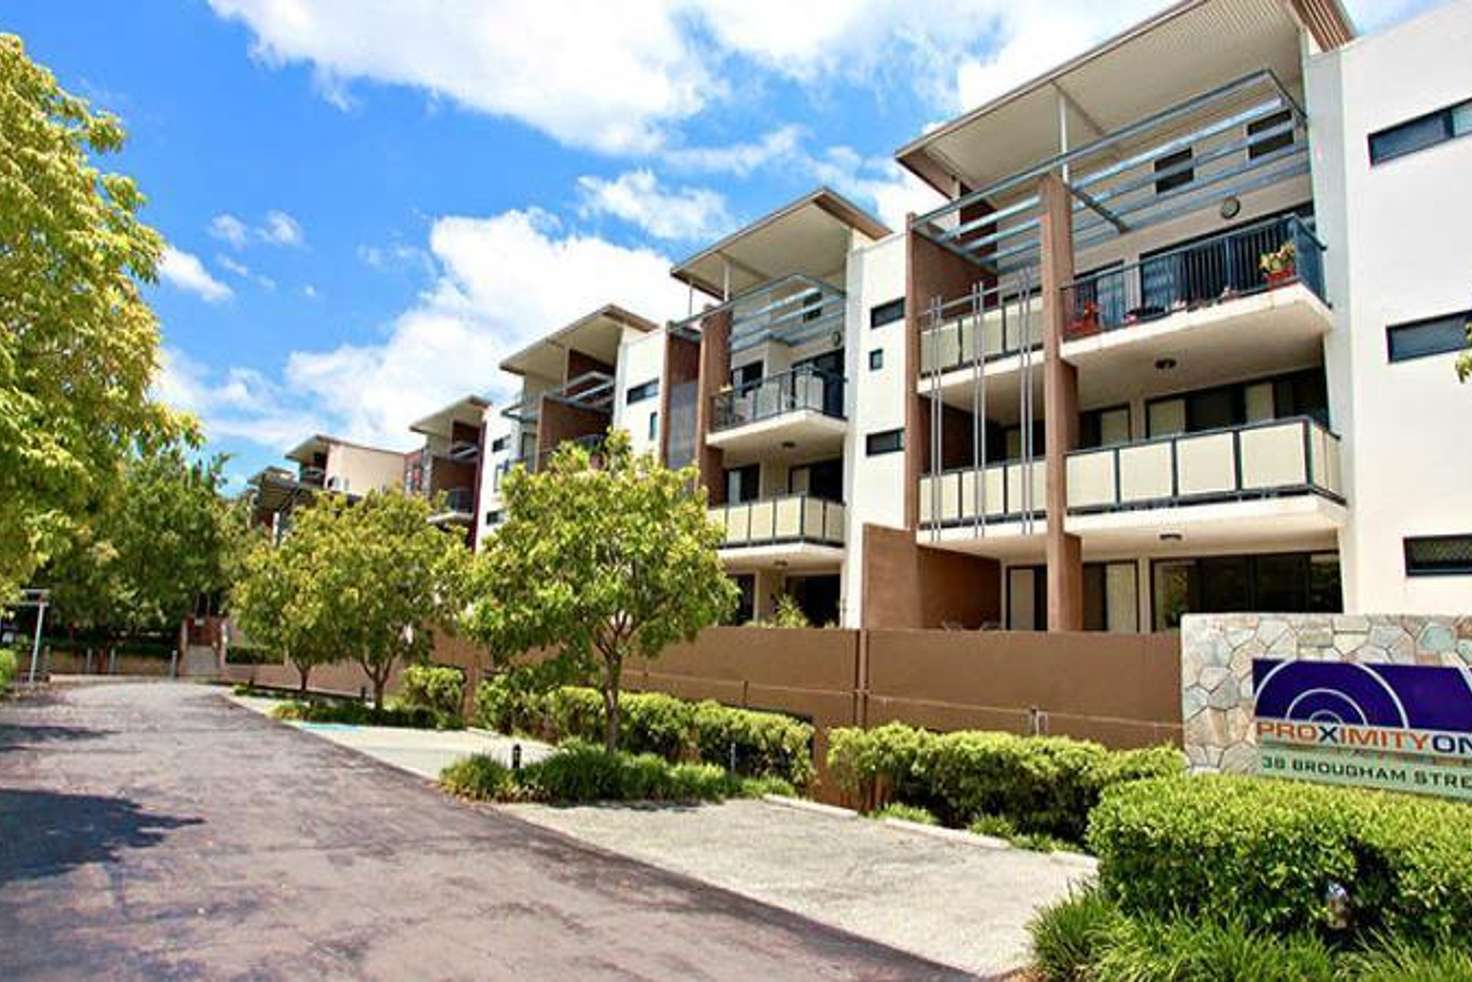 Main view of Homely unit listing, 21/38 Brougham St, Fairfield QLD 4103